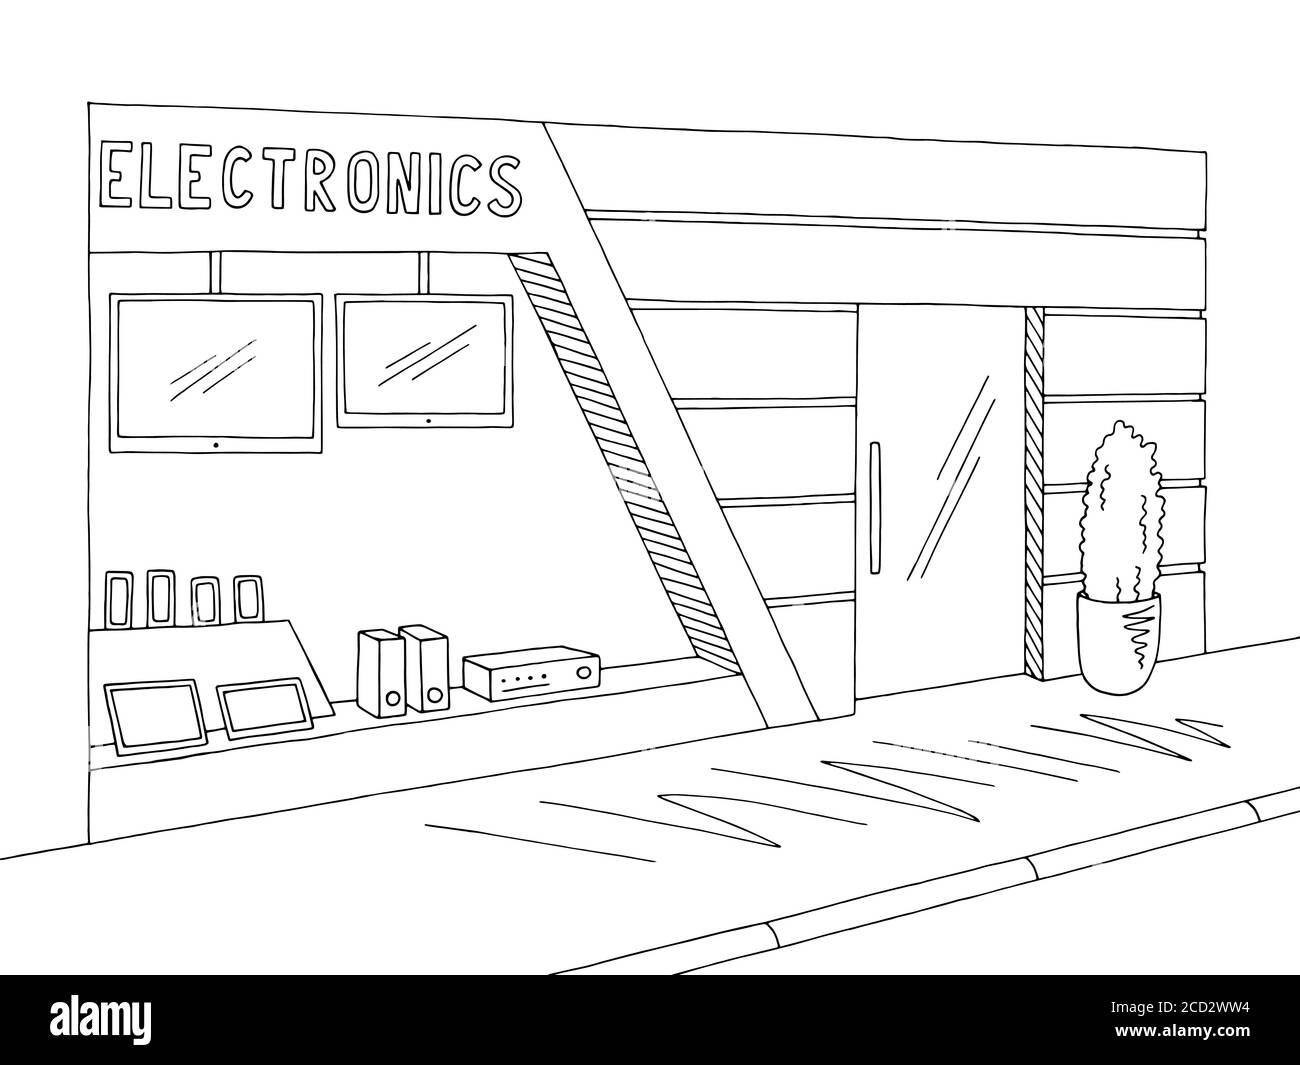 Electronics store exterior graphic black white sketch illustration vector Stock Vector